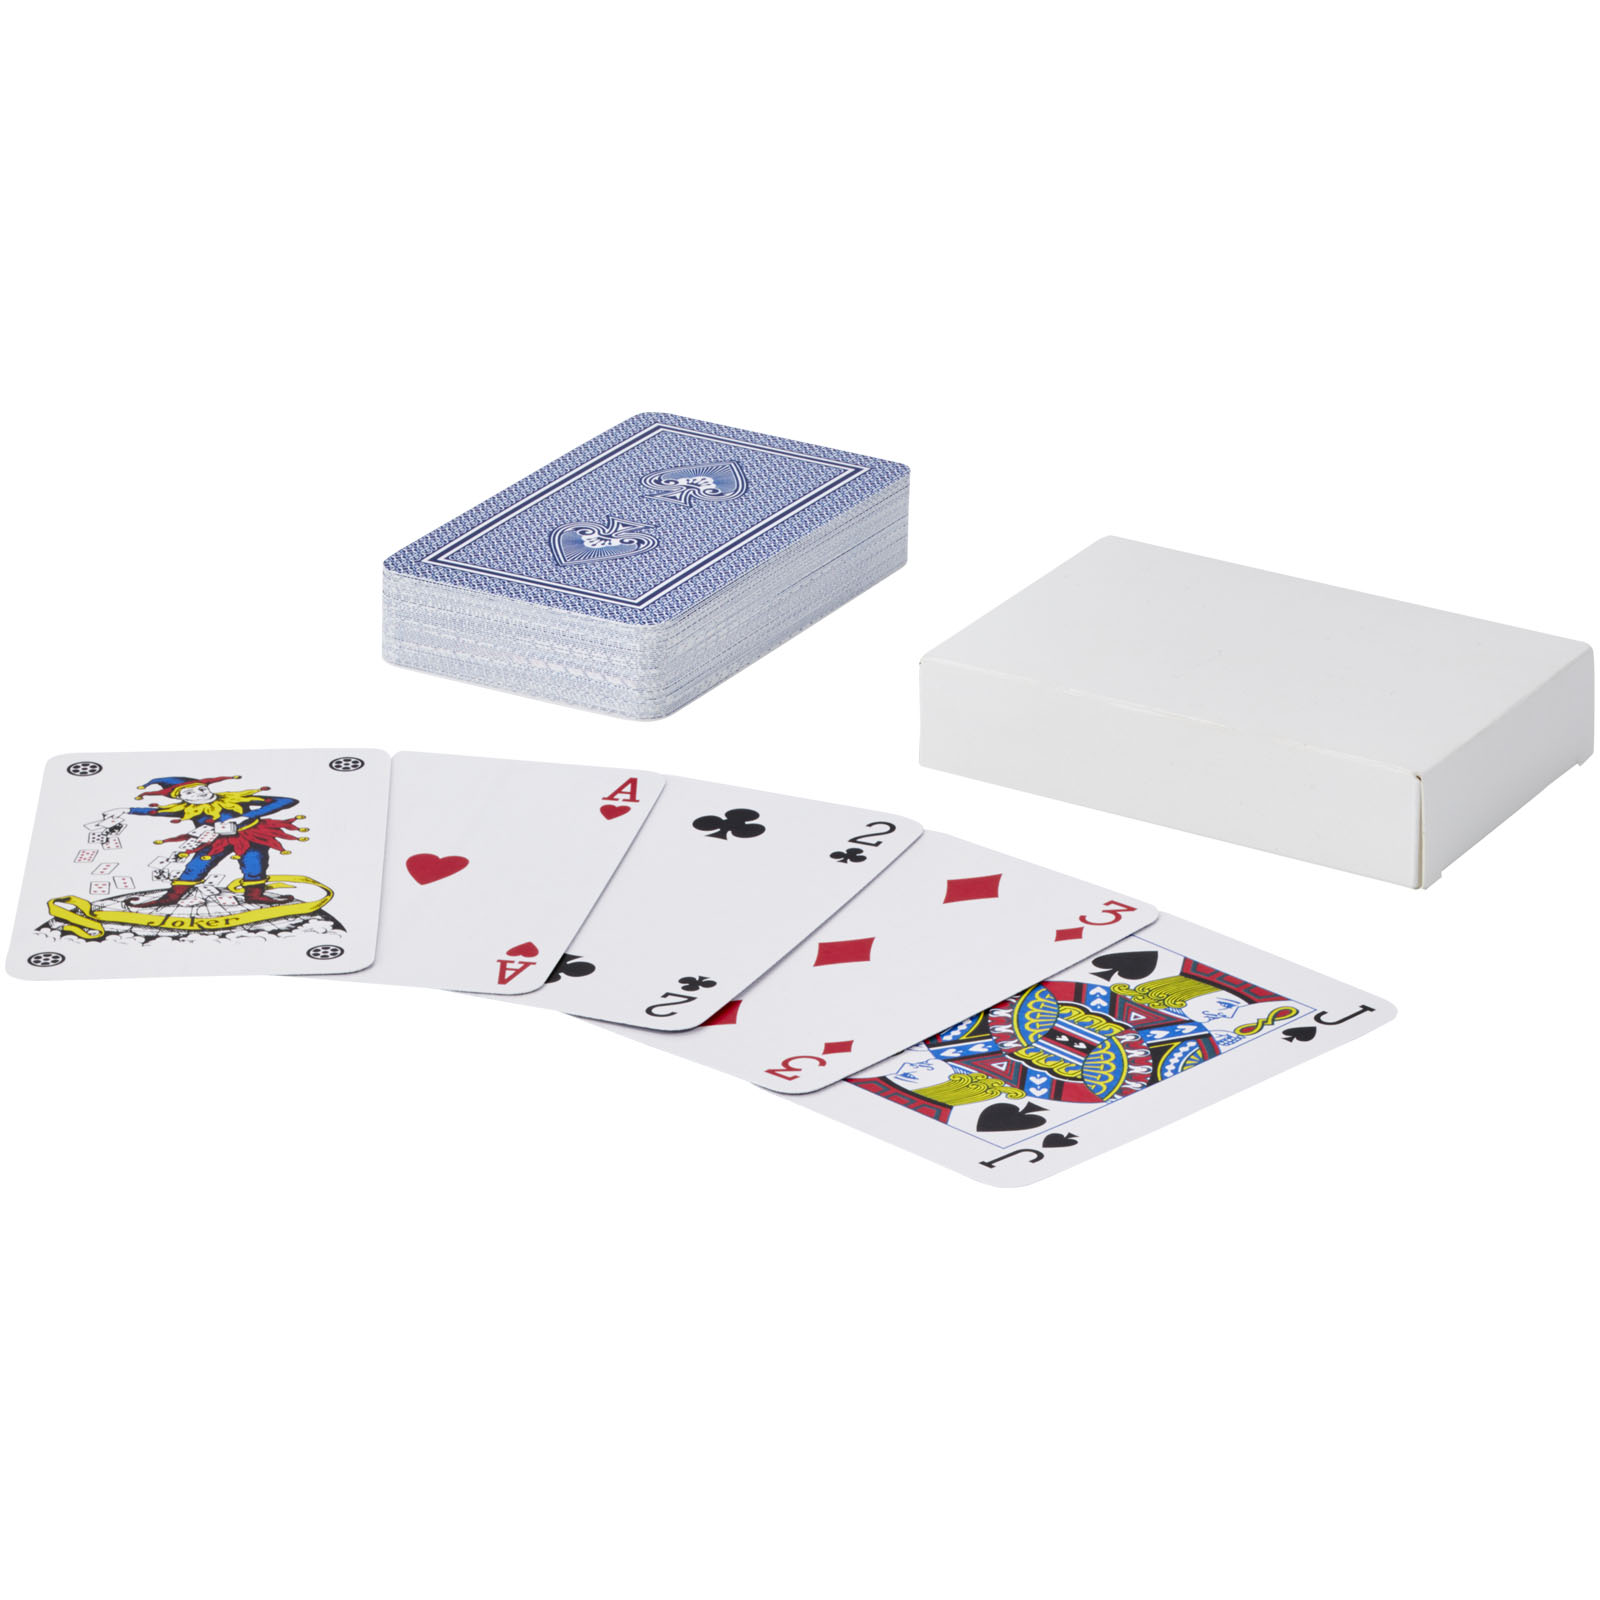 Advertising Indoor Games - Ace playing card set - 0